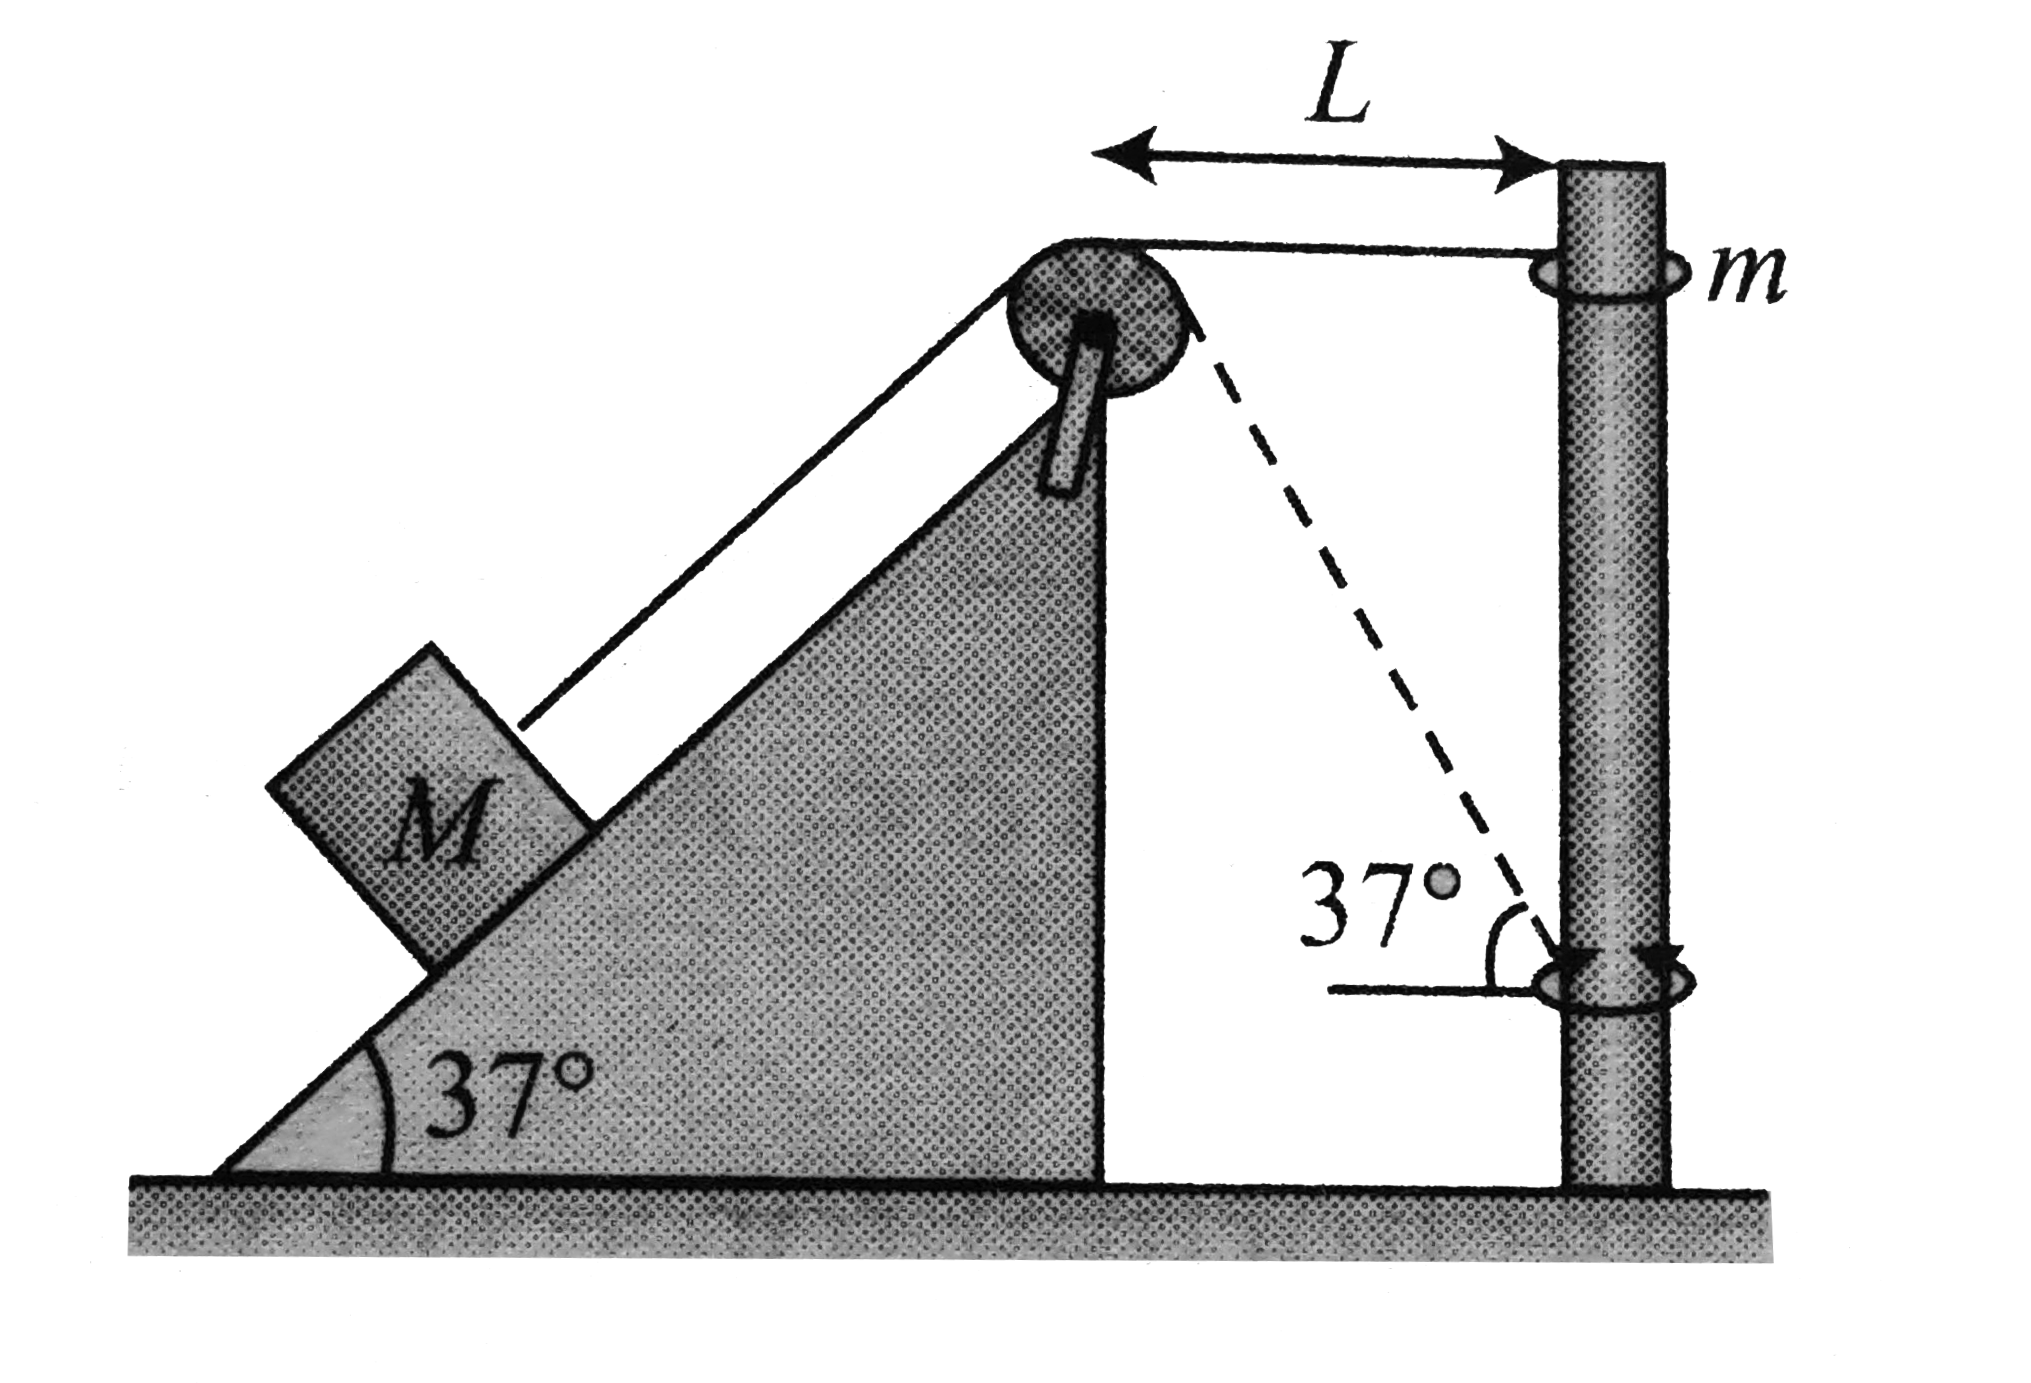 A ring of mass m=1kg can slide over a smooth vertical rod. A light string attached to the ring passing over a smooth fixed pulley at a distance of L=0.7m from the rod as shown in figure.      At the other end of the string mass M=5kg is attached, lying over a smooth fixed inclined plane of inclination angle 37^@. The ring is held in level with the pulley and released. Determine the velocity of ring when the string makes an angle (alpha=37^@) with the horizontal. [sin 37^@=0.6]